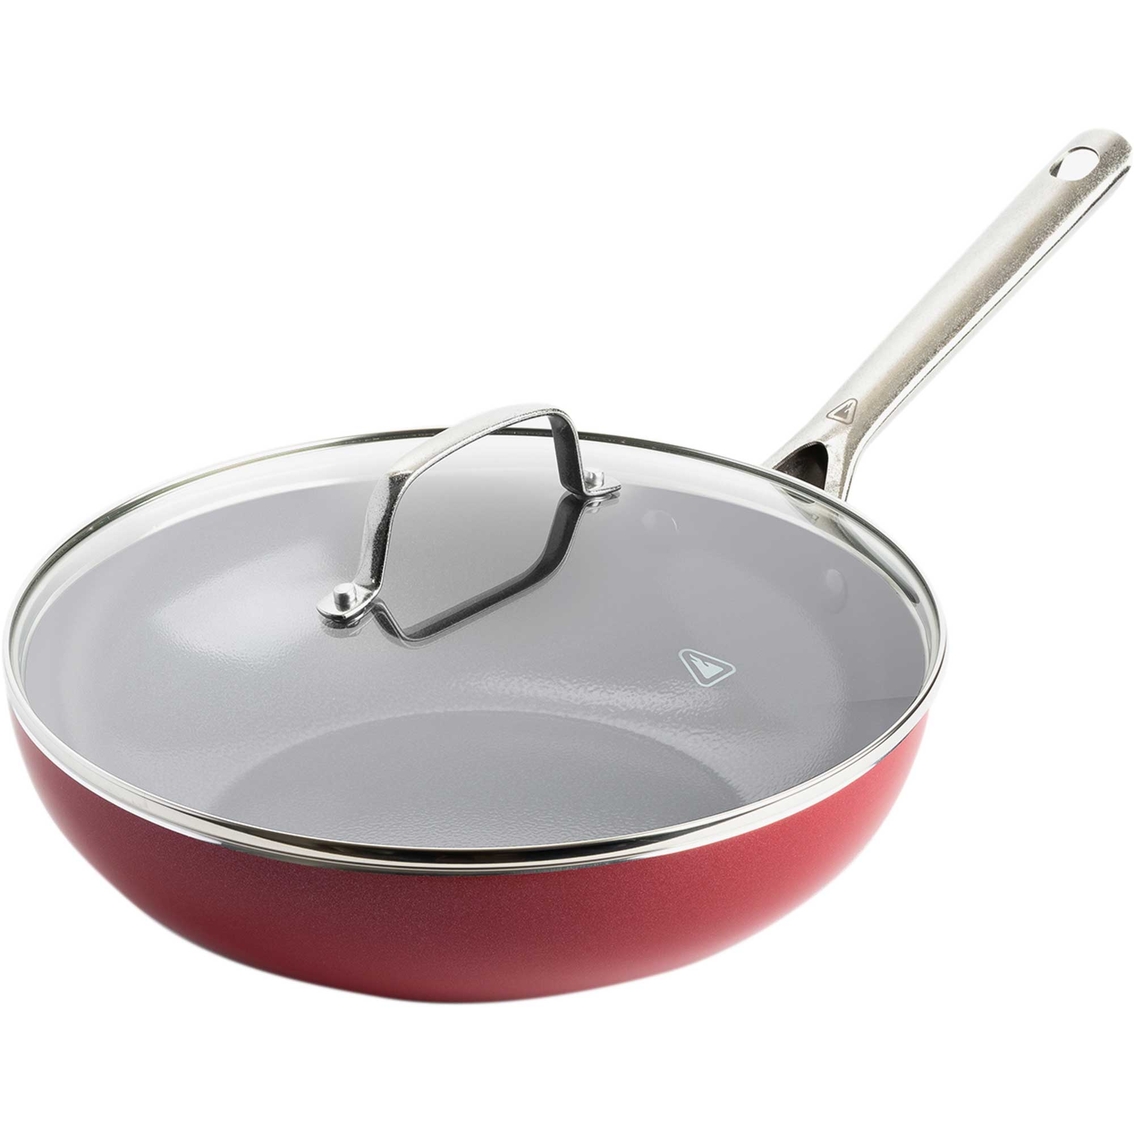 Red Volcano 11 In. All Purpose Pan | Fry Pans & Skillets | Household ...